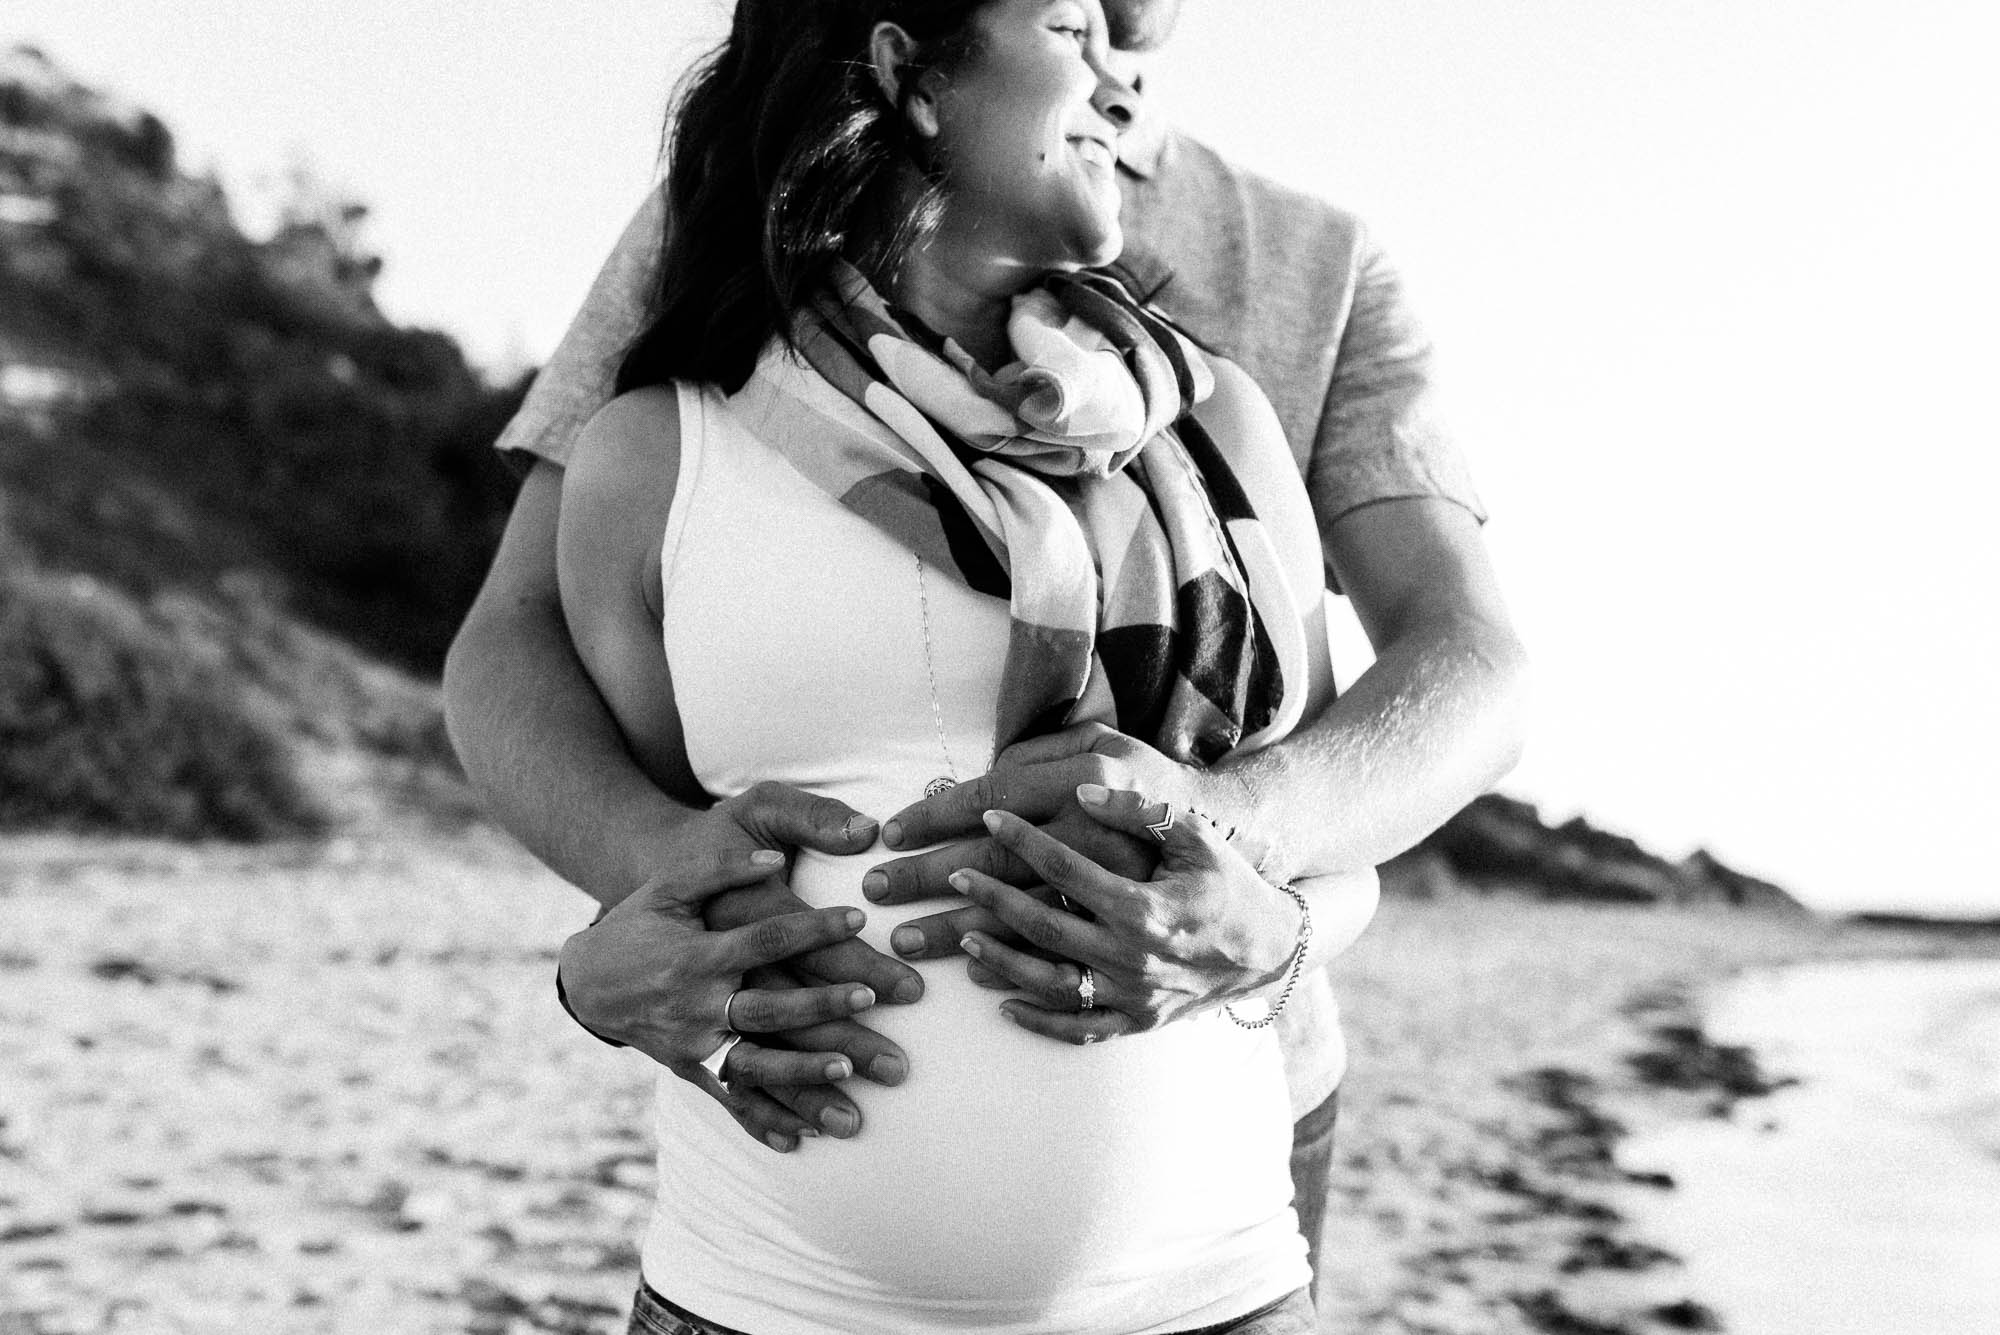 melbourne_maternity_photographer_jenny_rusby_photography_black_and_white_image_of_couple_standing_together_at_the_beach